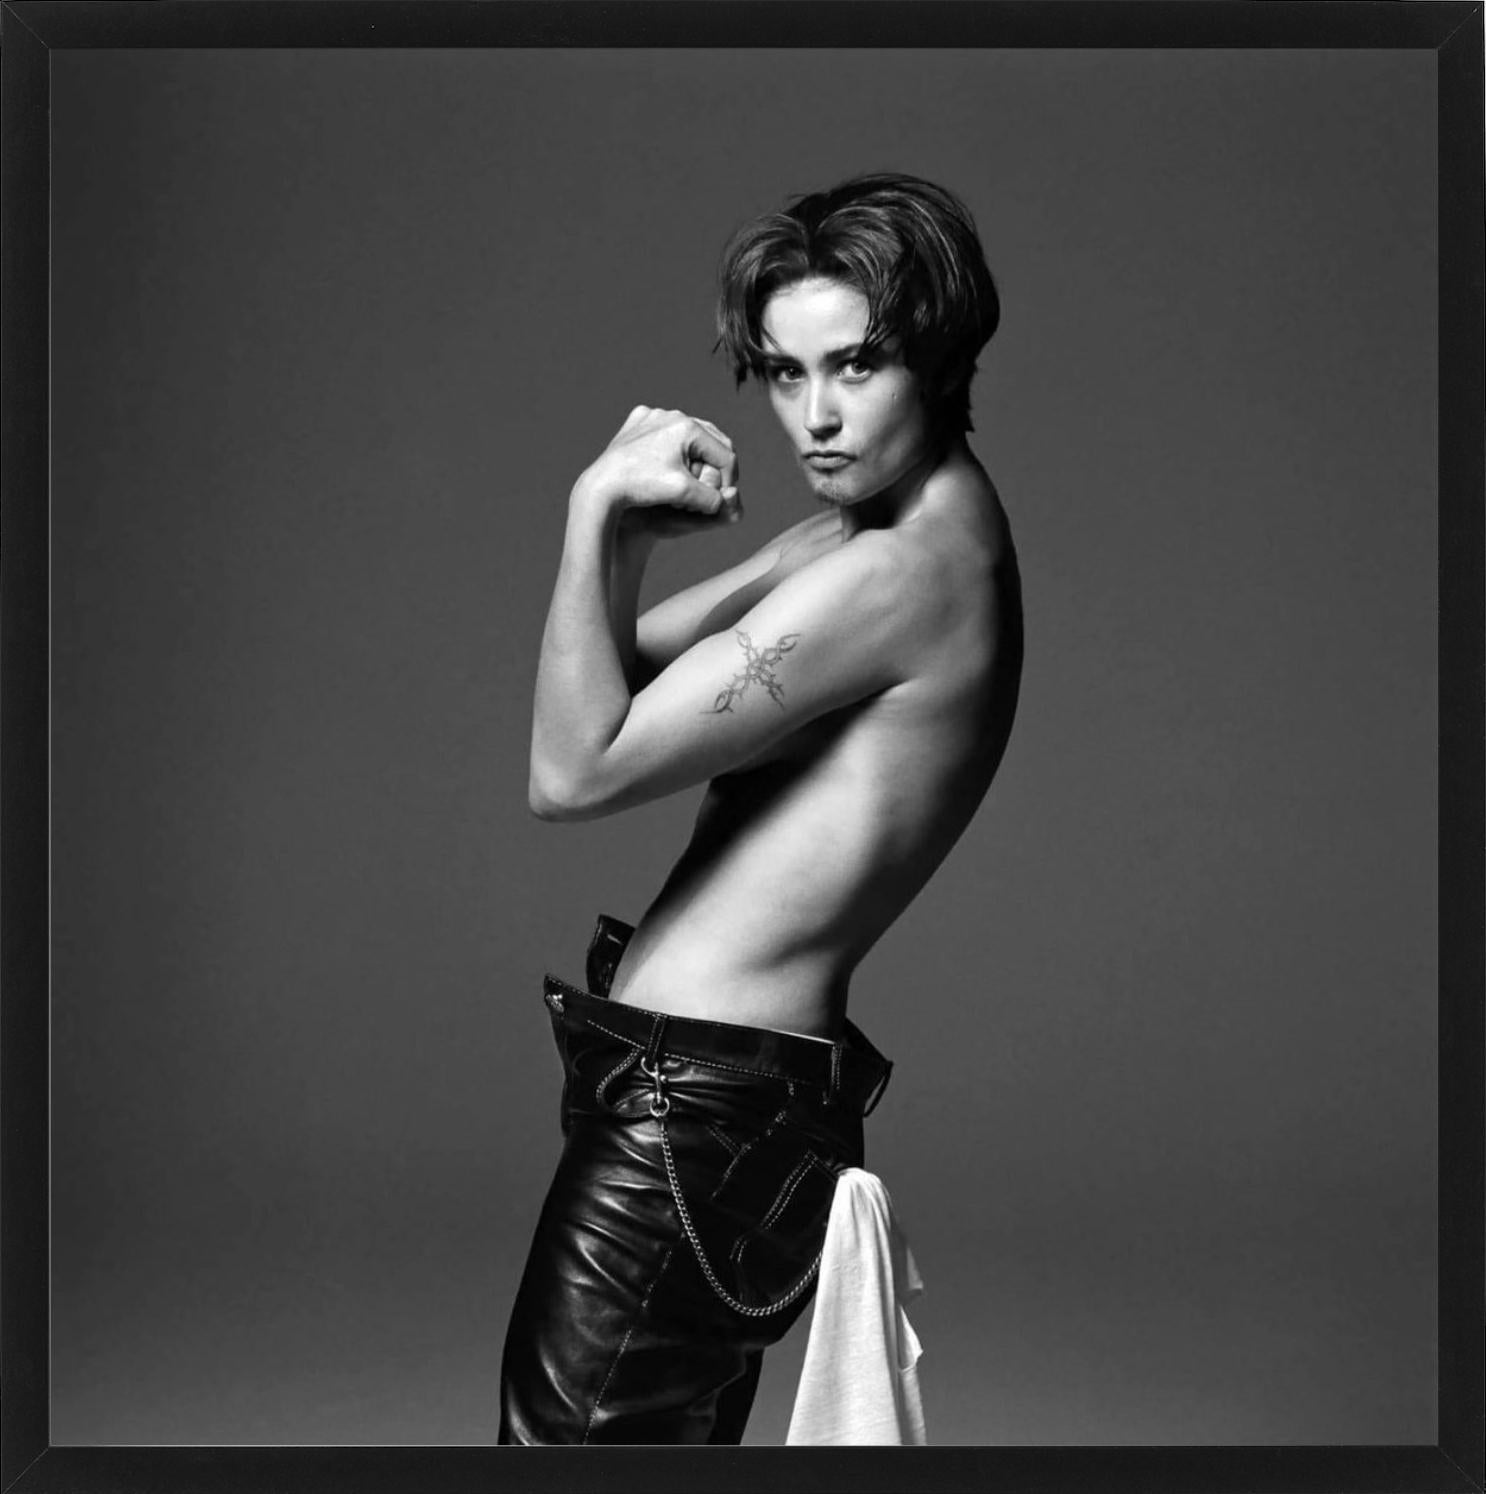 Demi Moore - model posing topless in leather pants, black-and-white photograph - Contemporary Photograph by Michel Comte